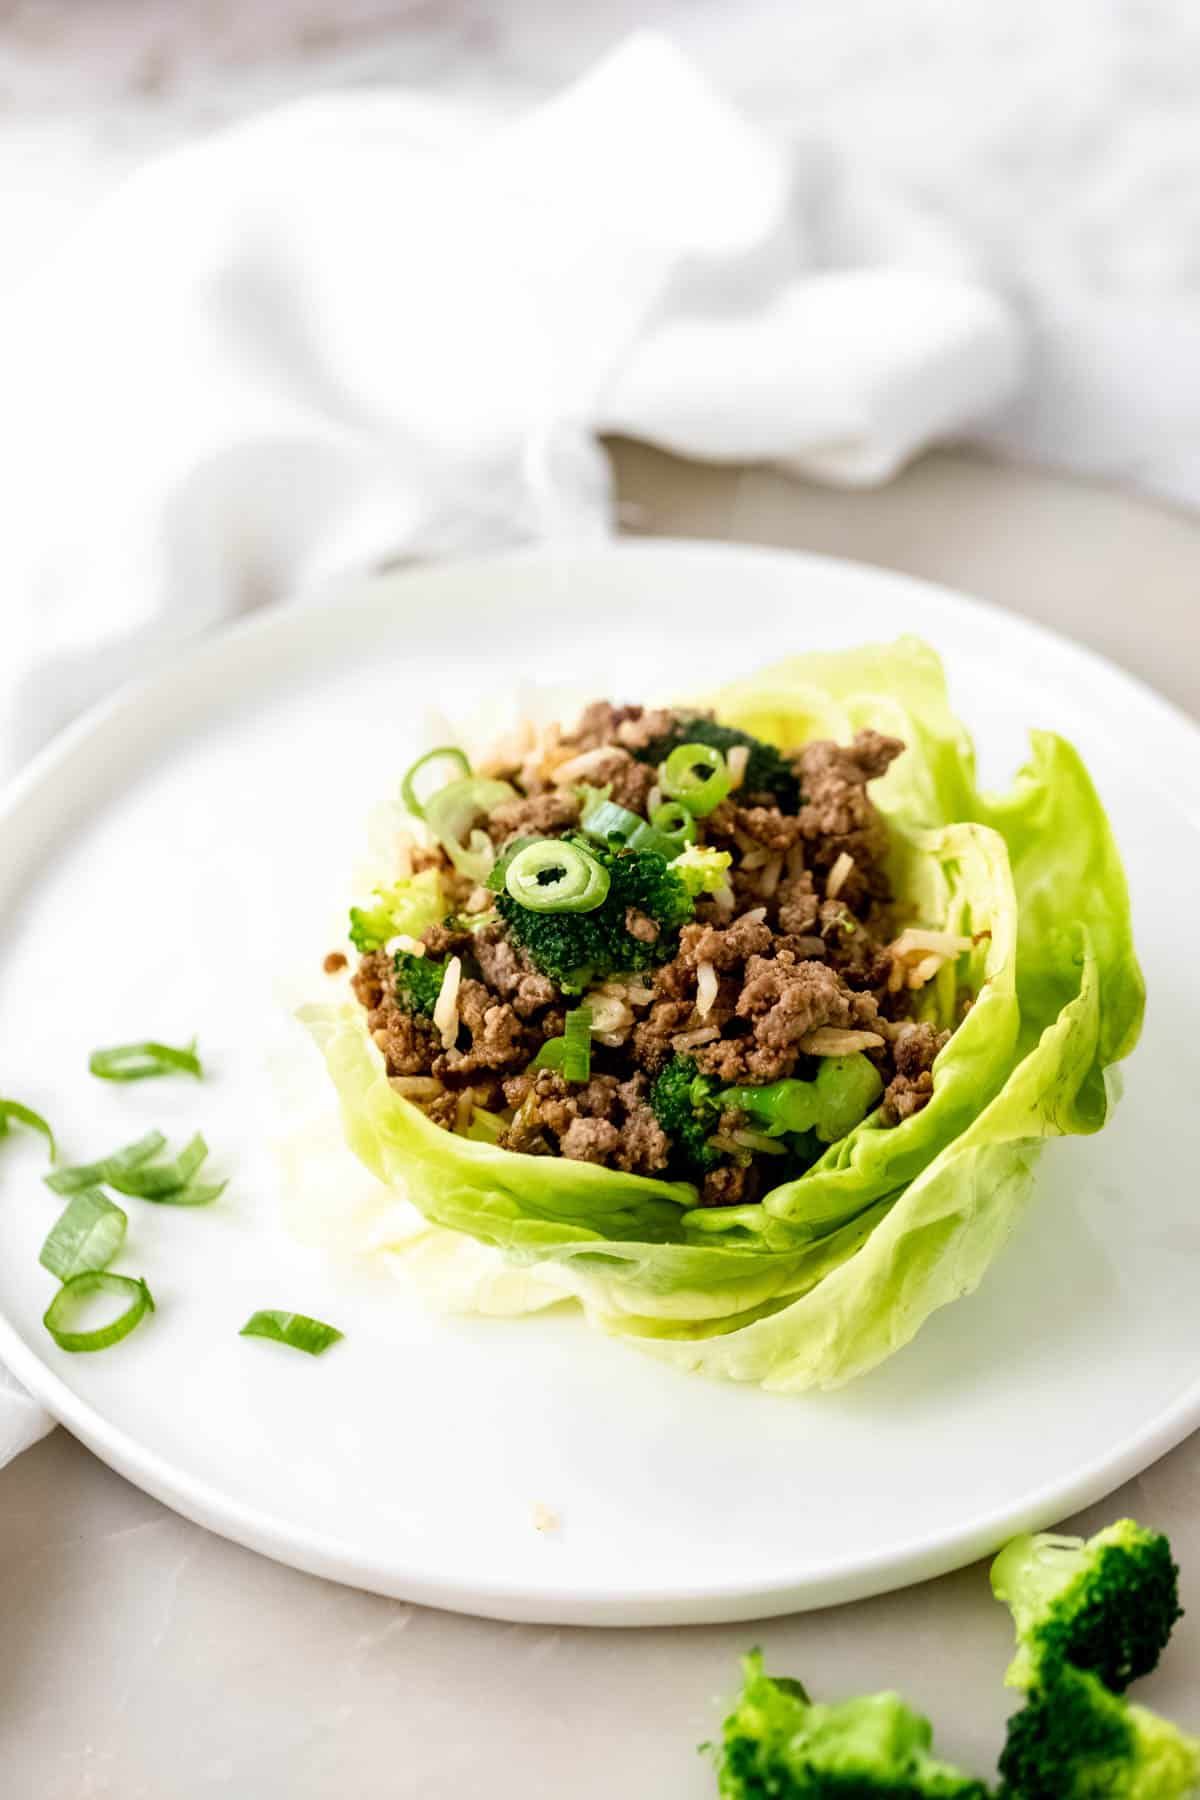 An Asian beef and broccoli lettuce wrap on a white plate.